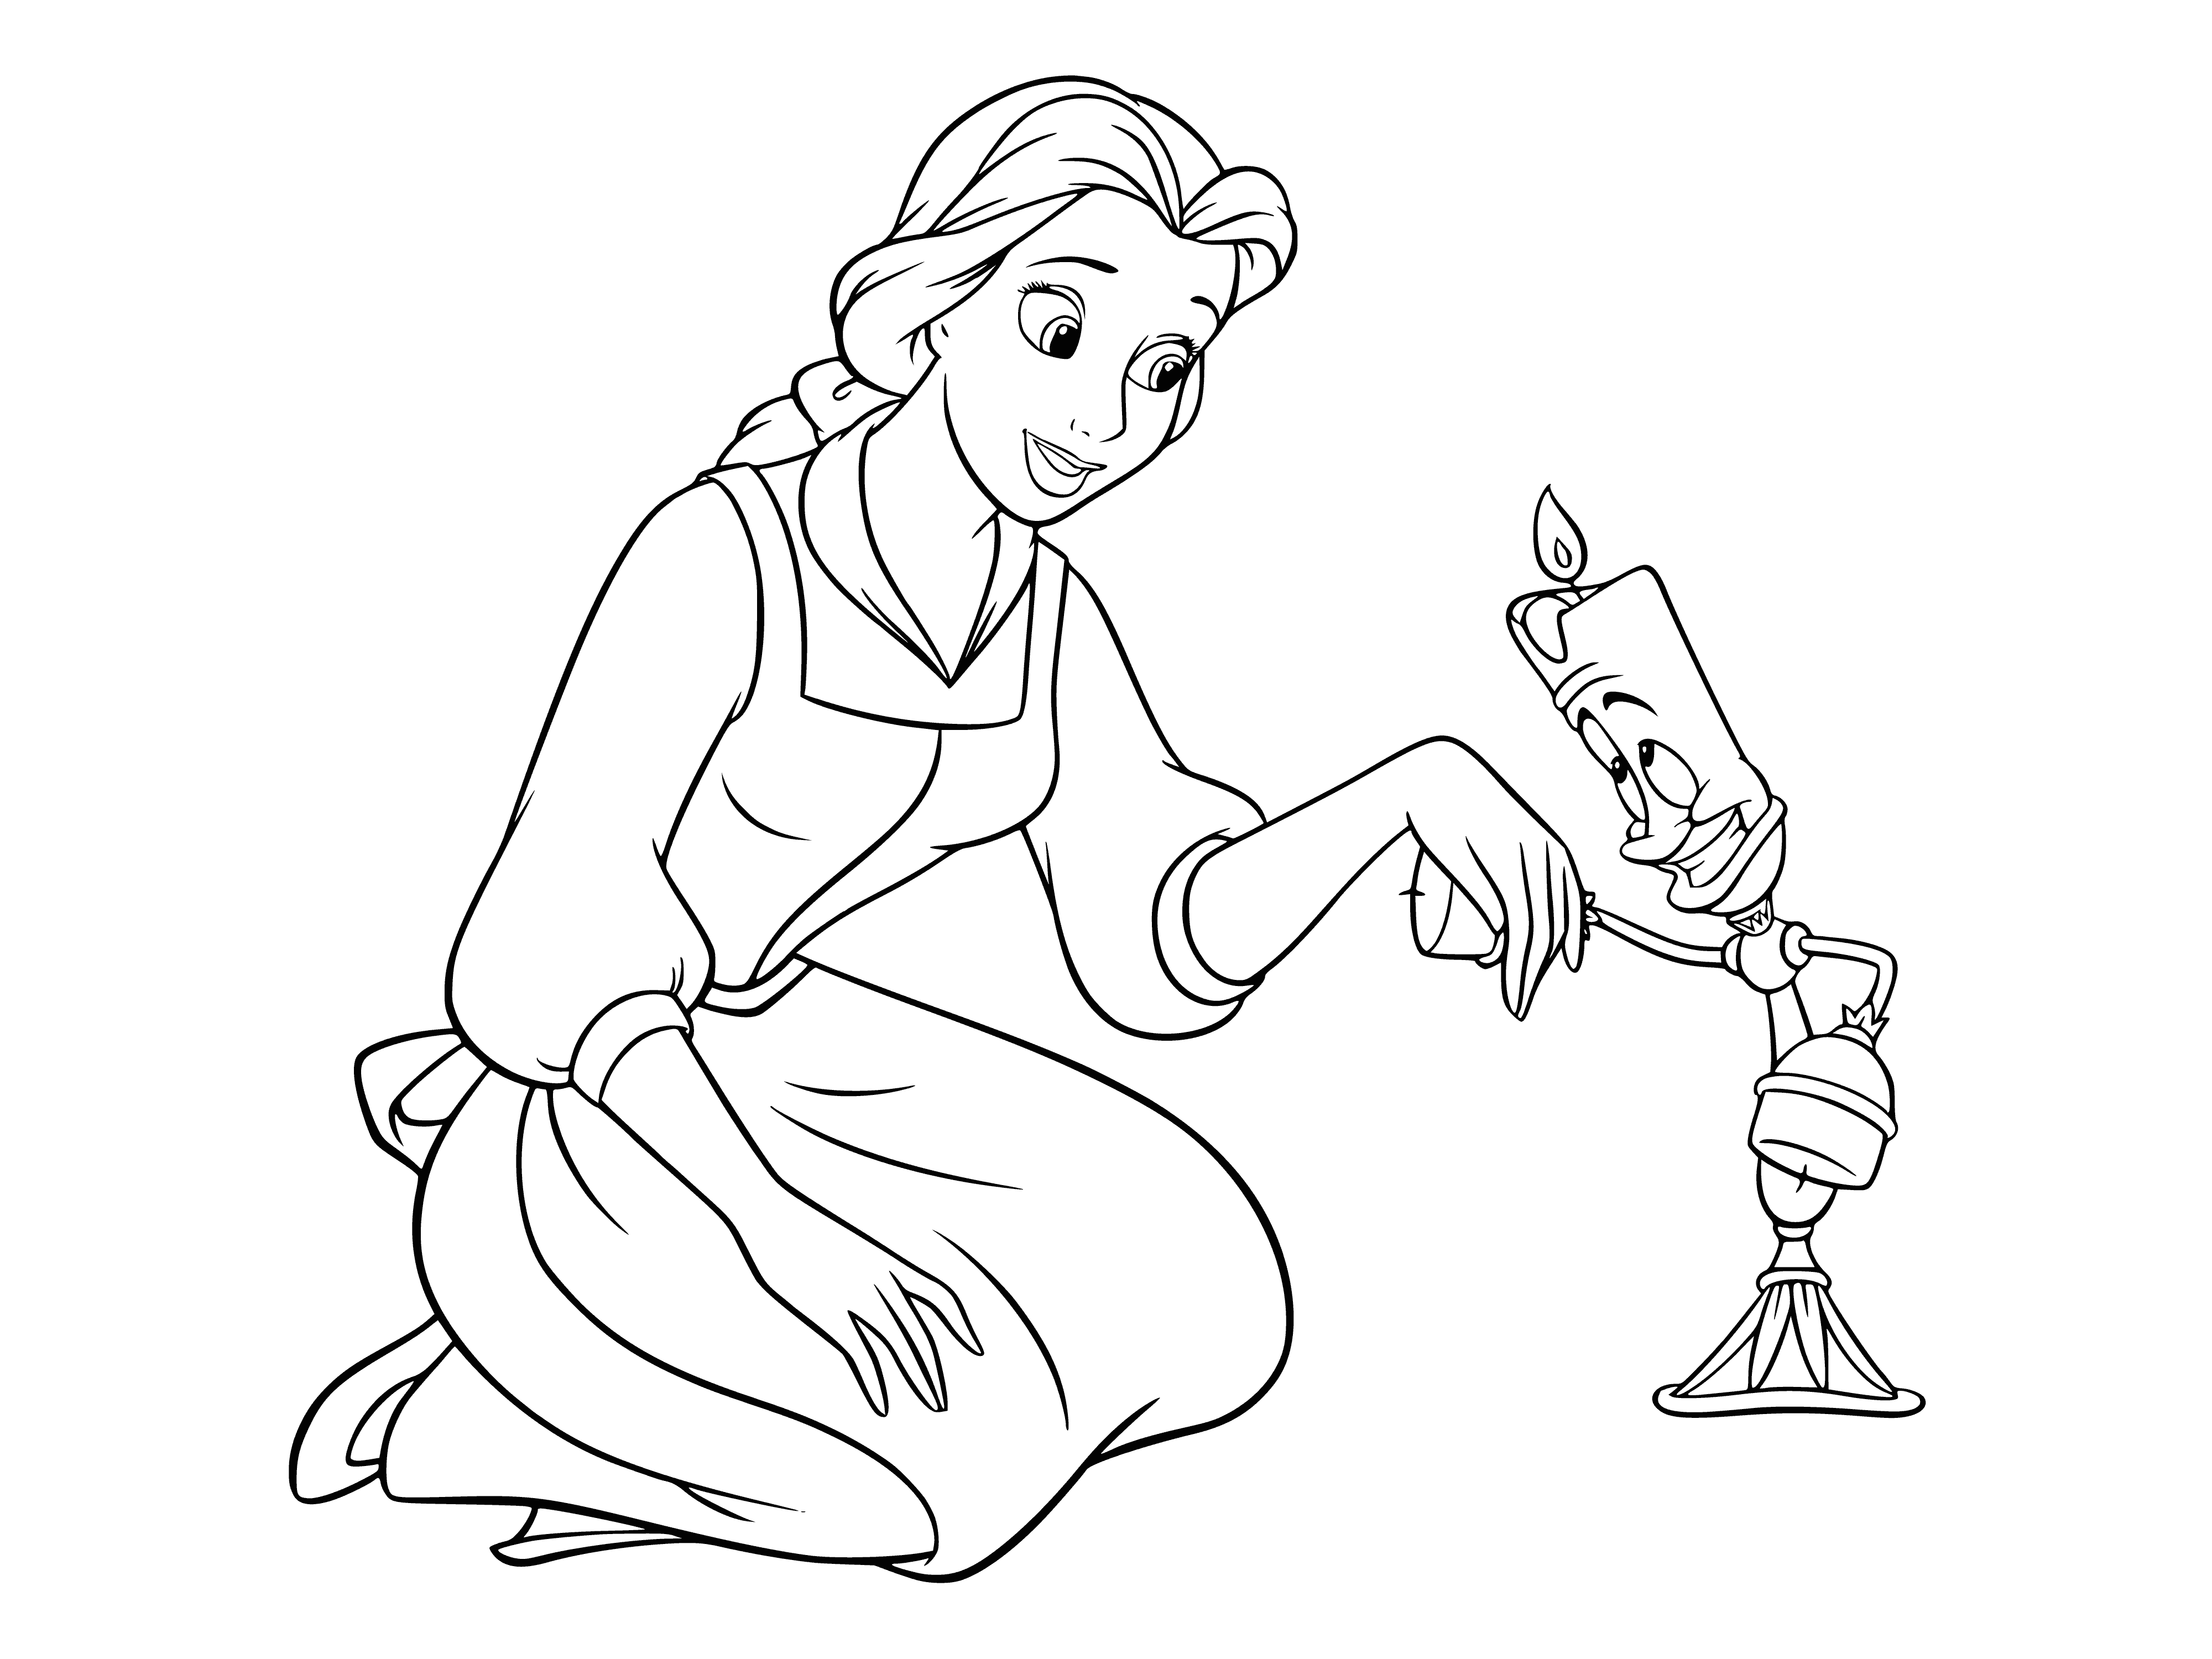 Belle meets Lumiere coloring page